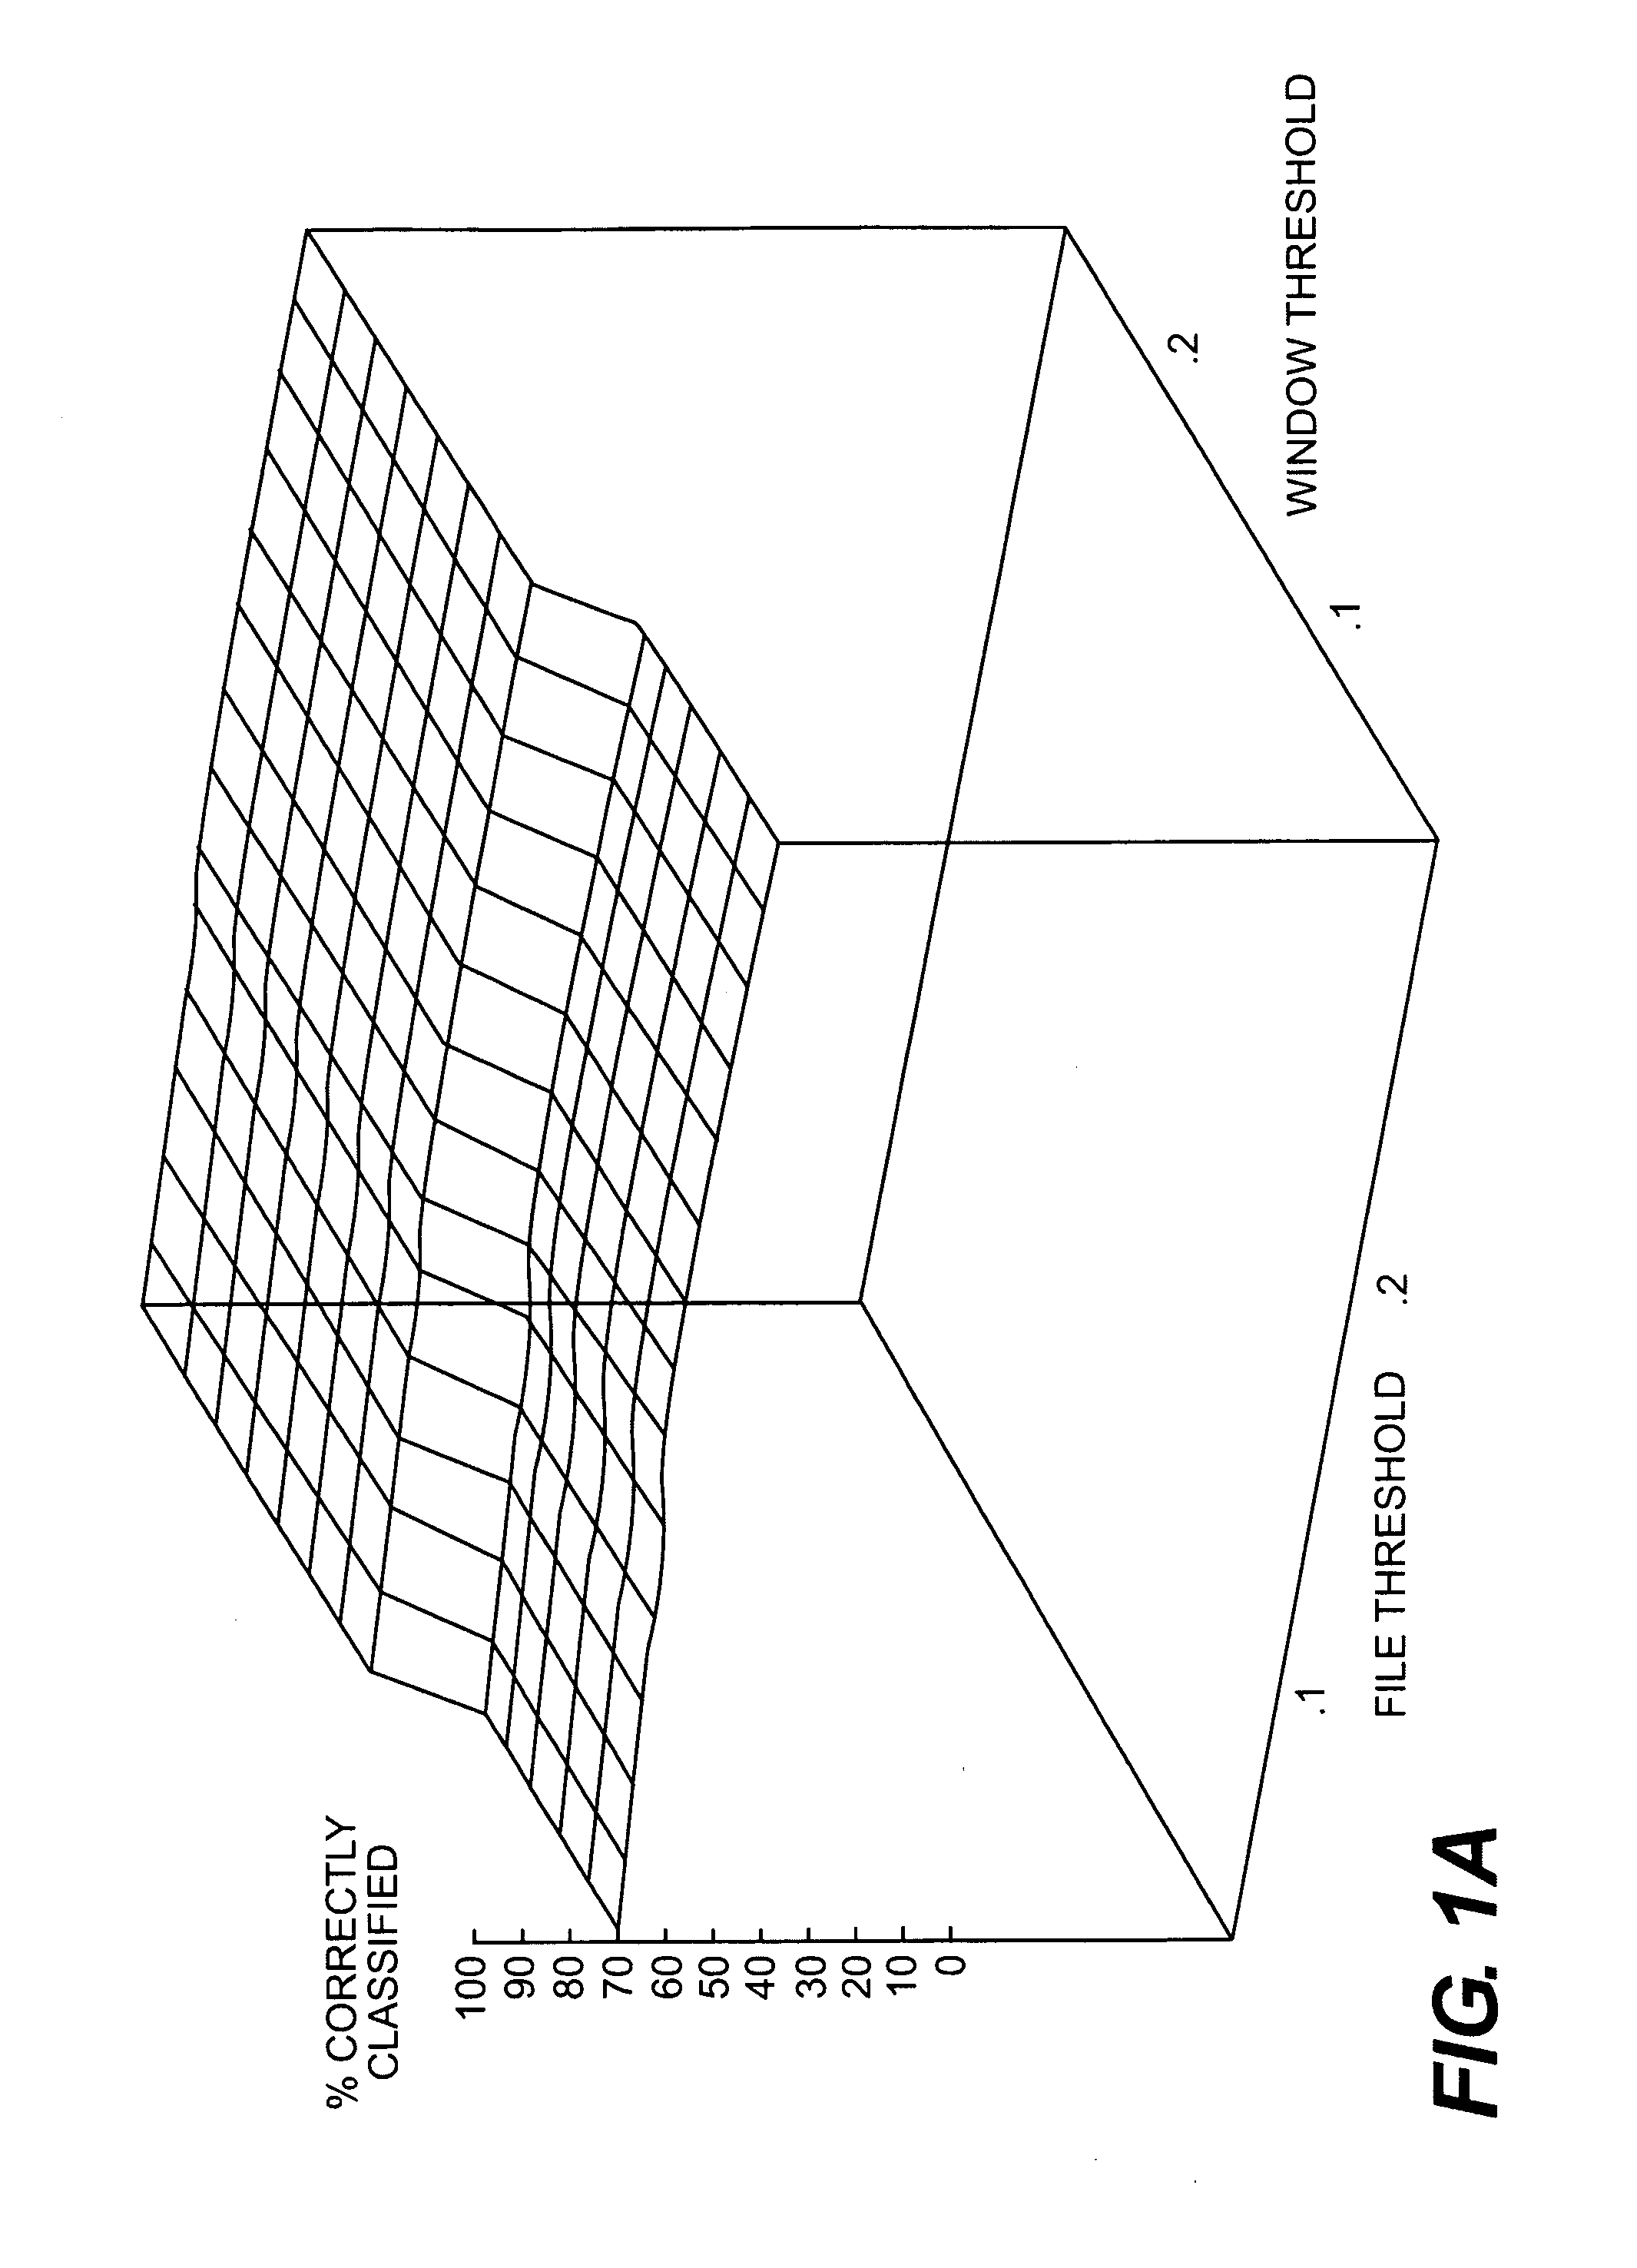 Computer intrusion detection system and method based on application monitoring